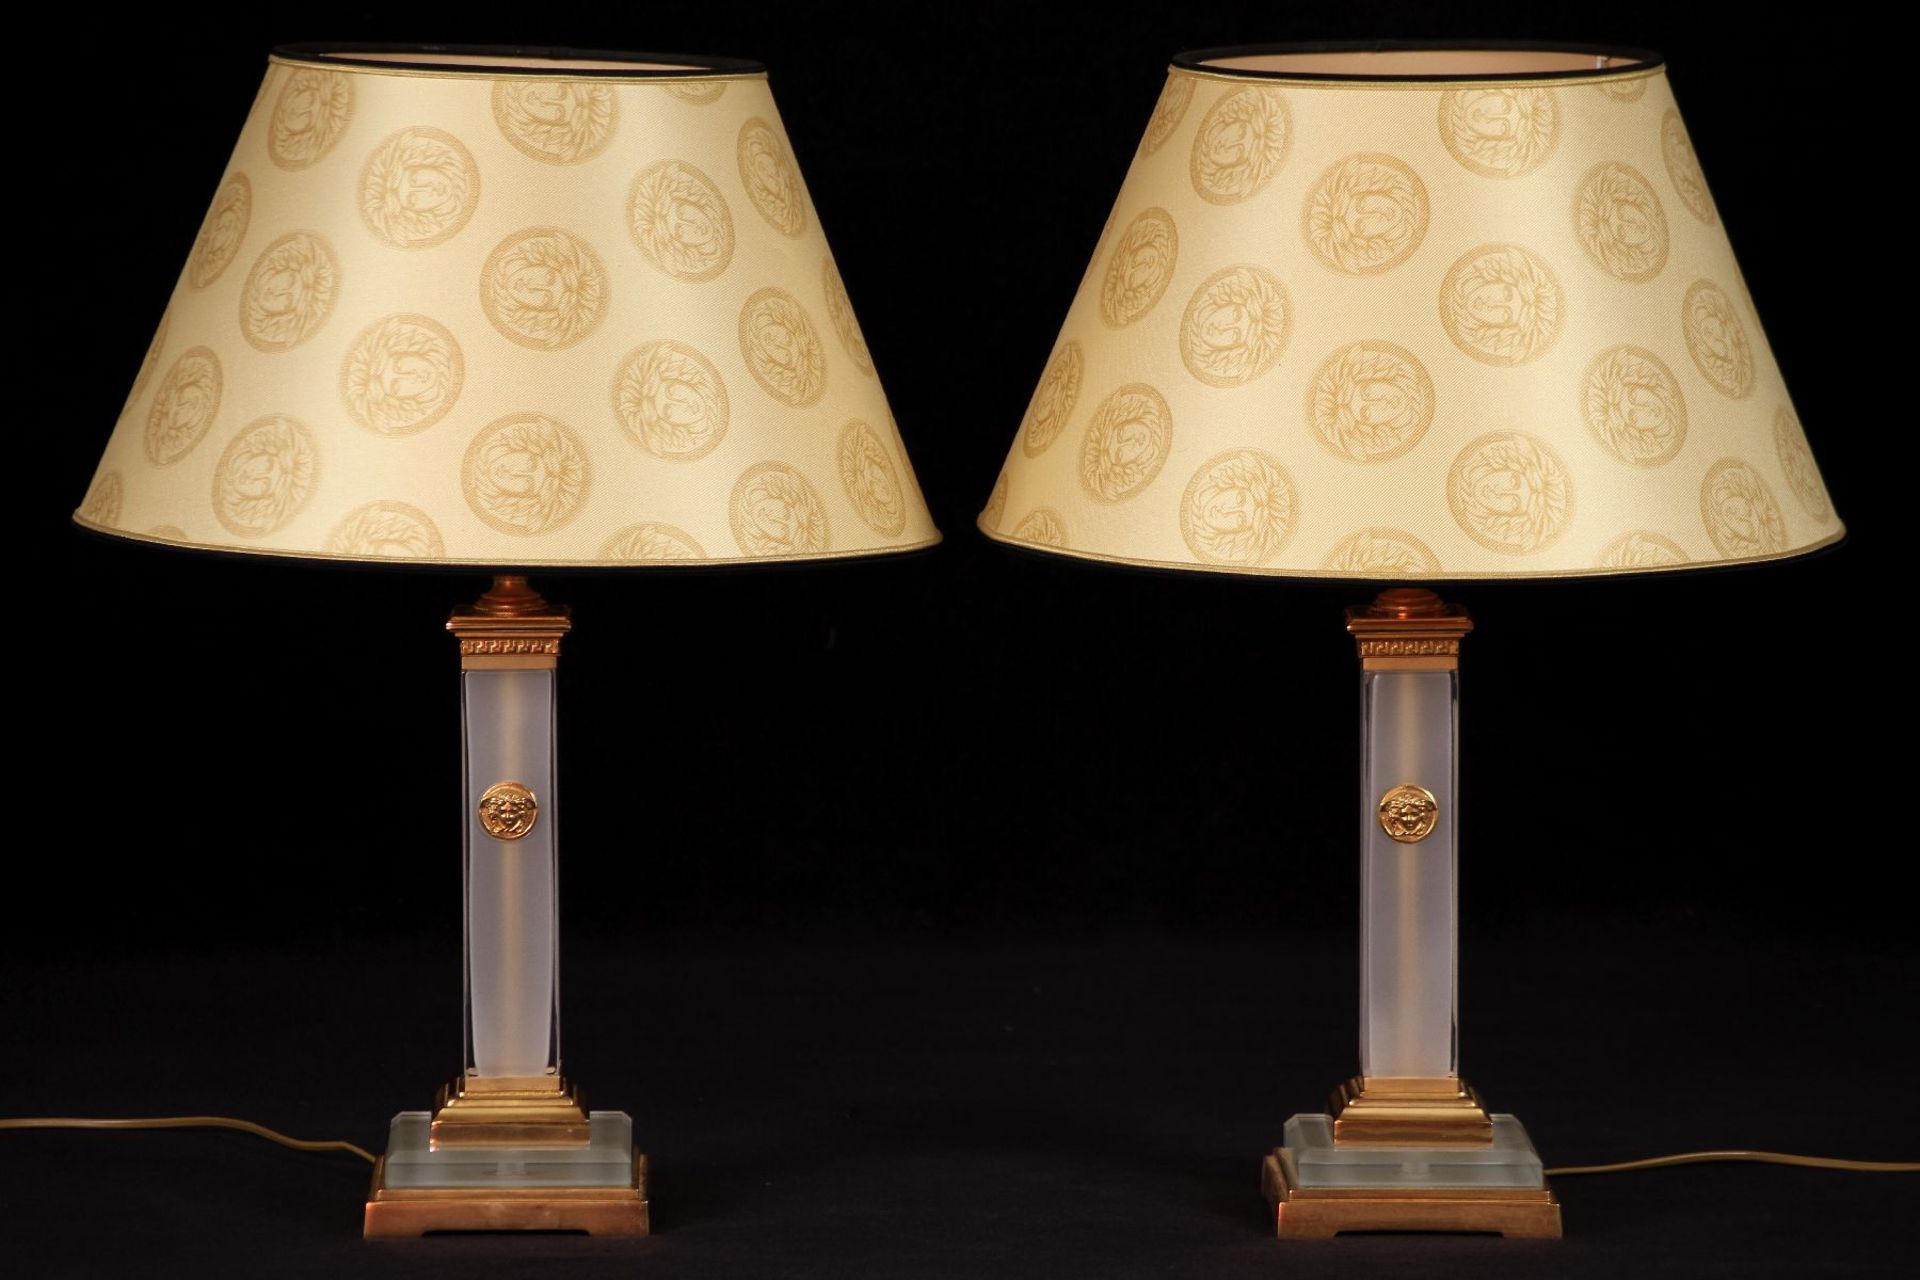 2 table lamps, Italy, gold-plated metal, frosted glass elements, front of the shaft with metal